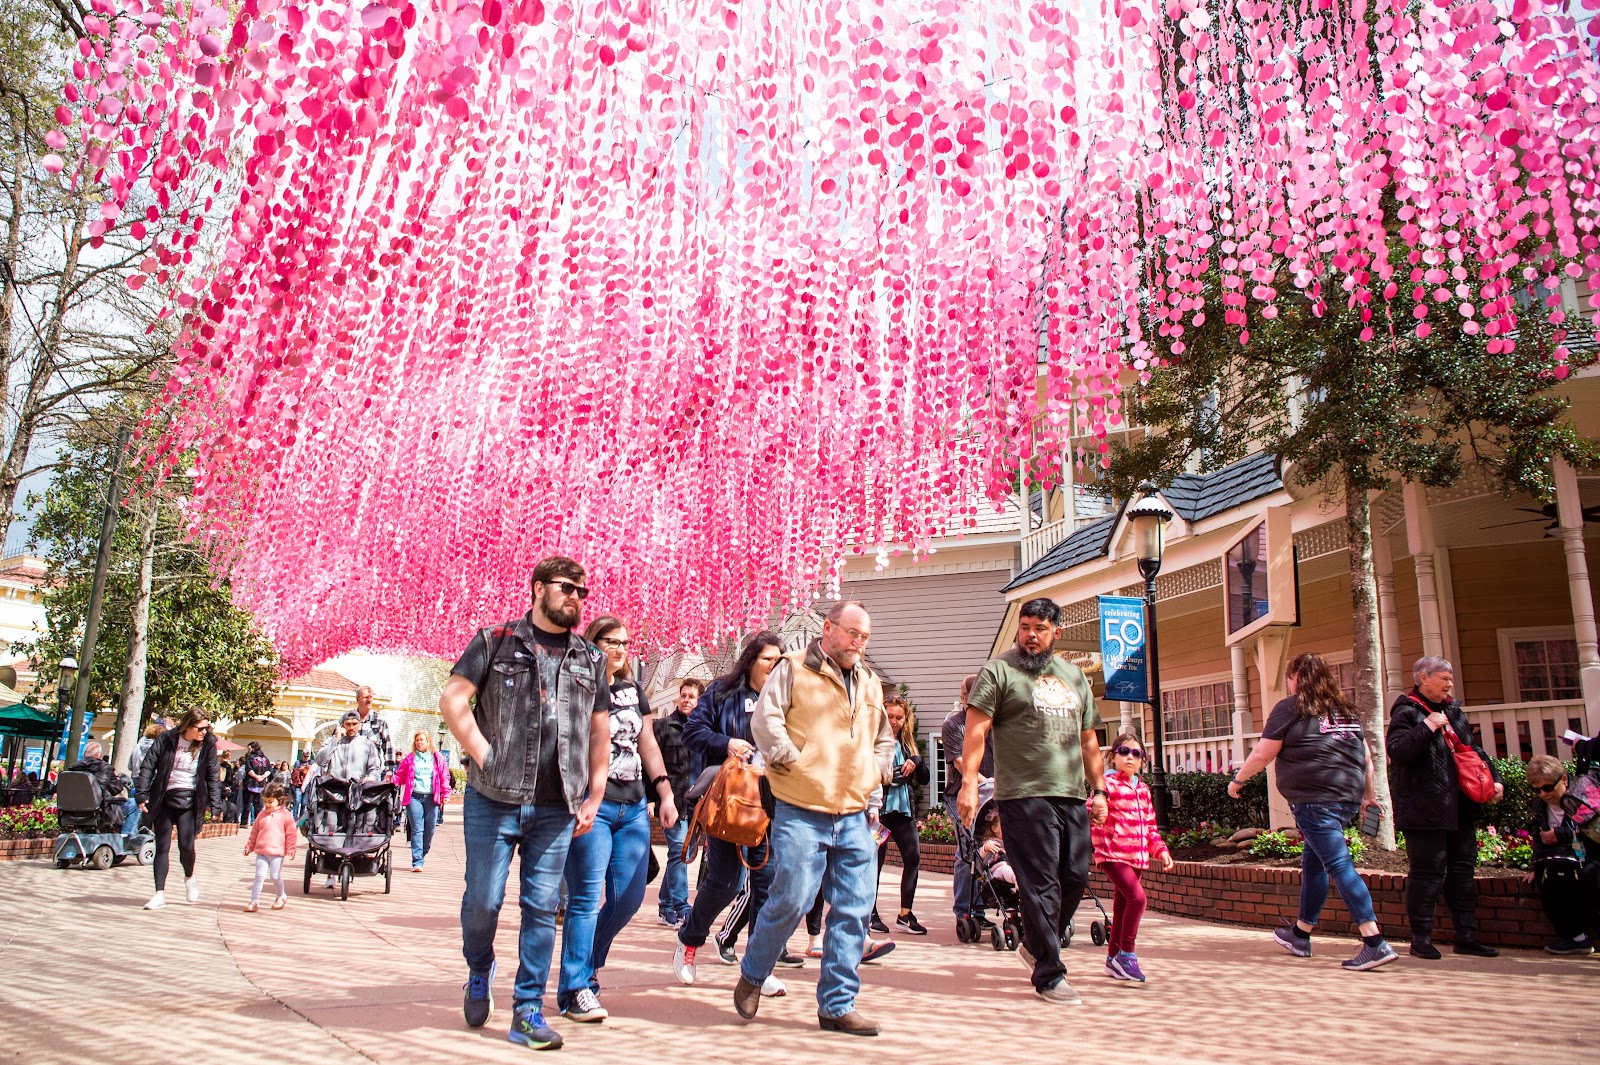 Guests walk under glittering pink sequins in the Showstreet Area of Dollywood on the park's opening day for pass holders on Friday, March 10, 2023. Dollywood is currently celebrating the 50th anniversary of "I Will Always Love You," one of Parton's biggest hits.